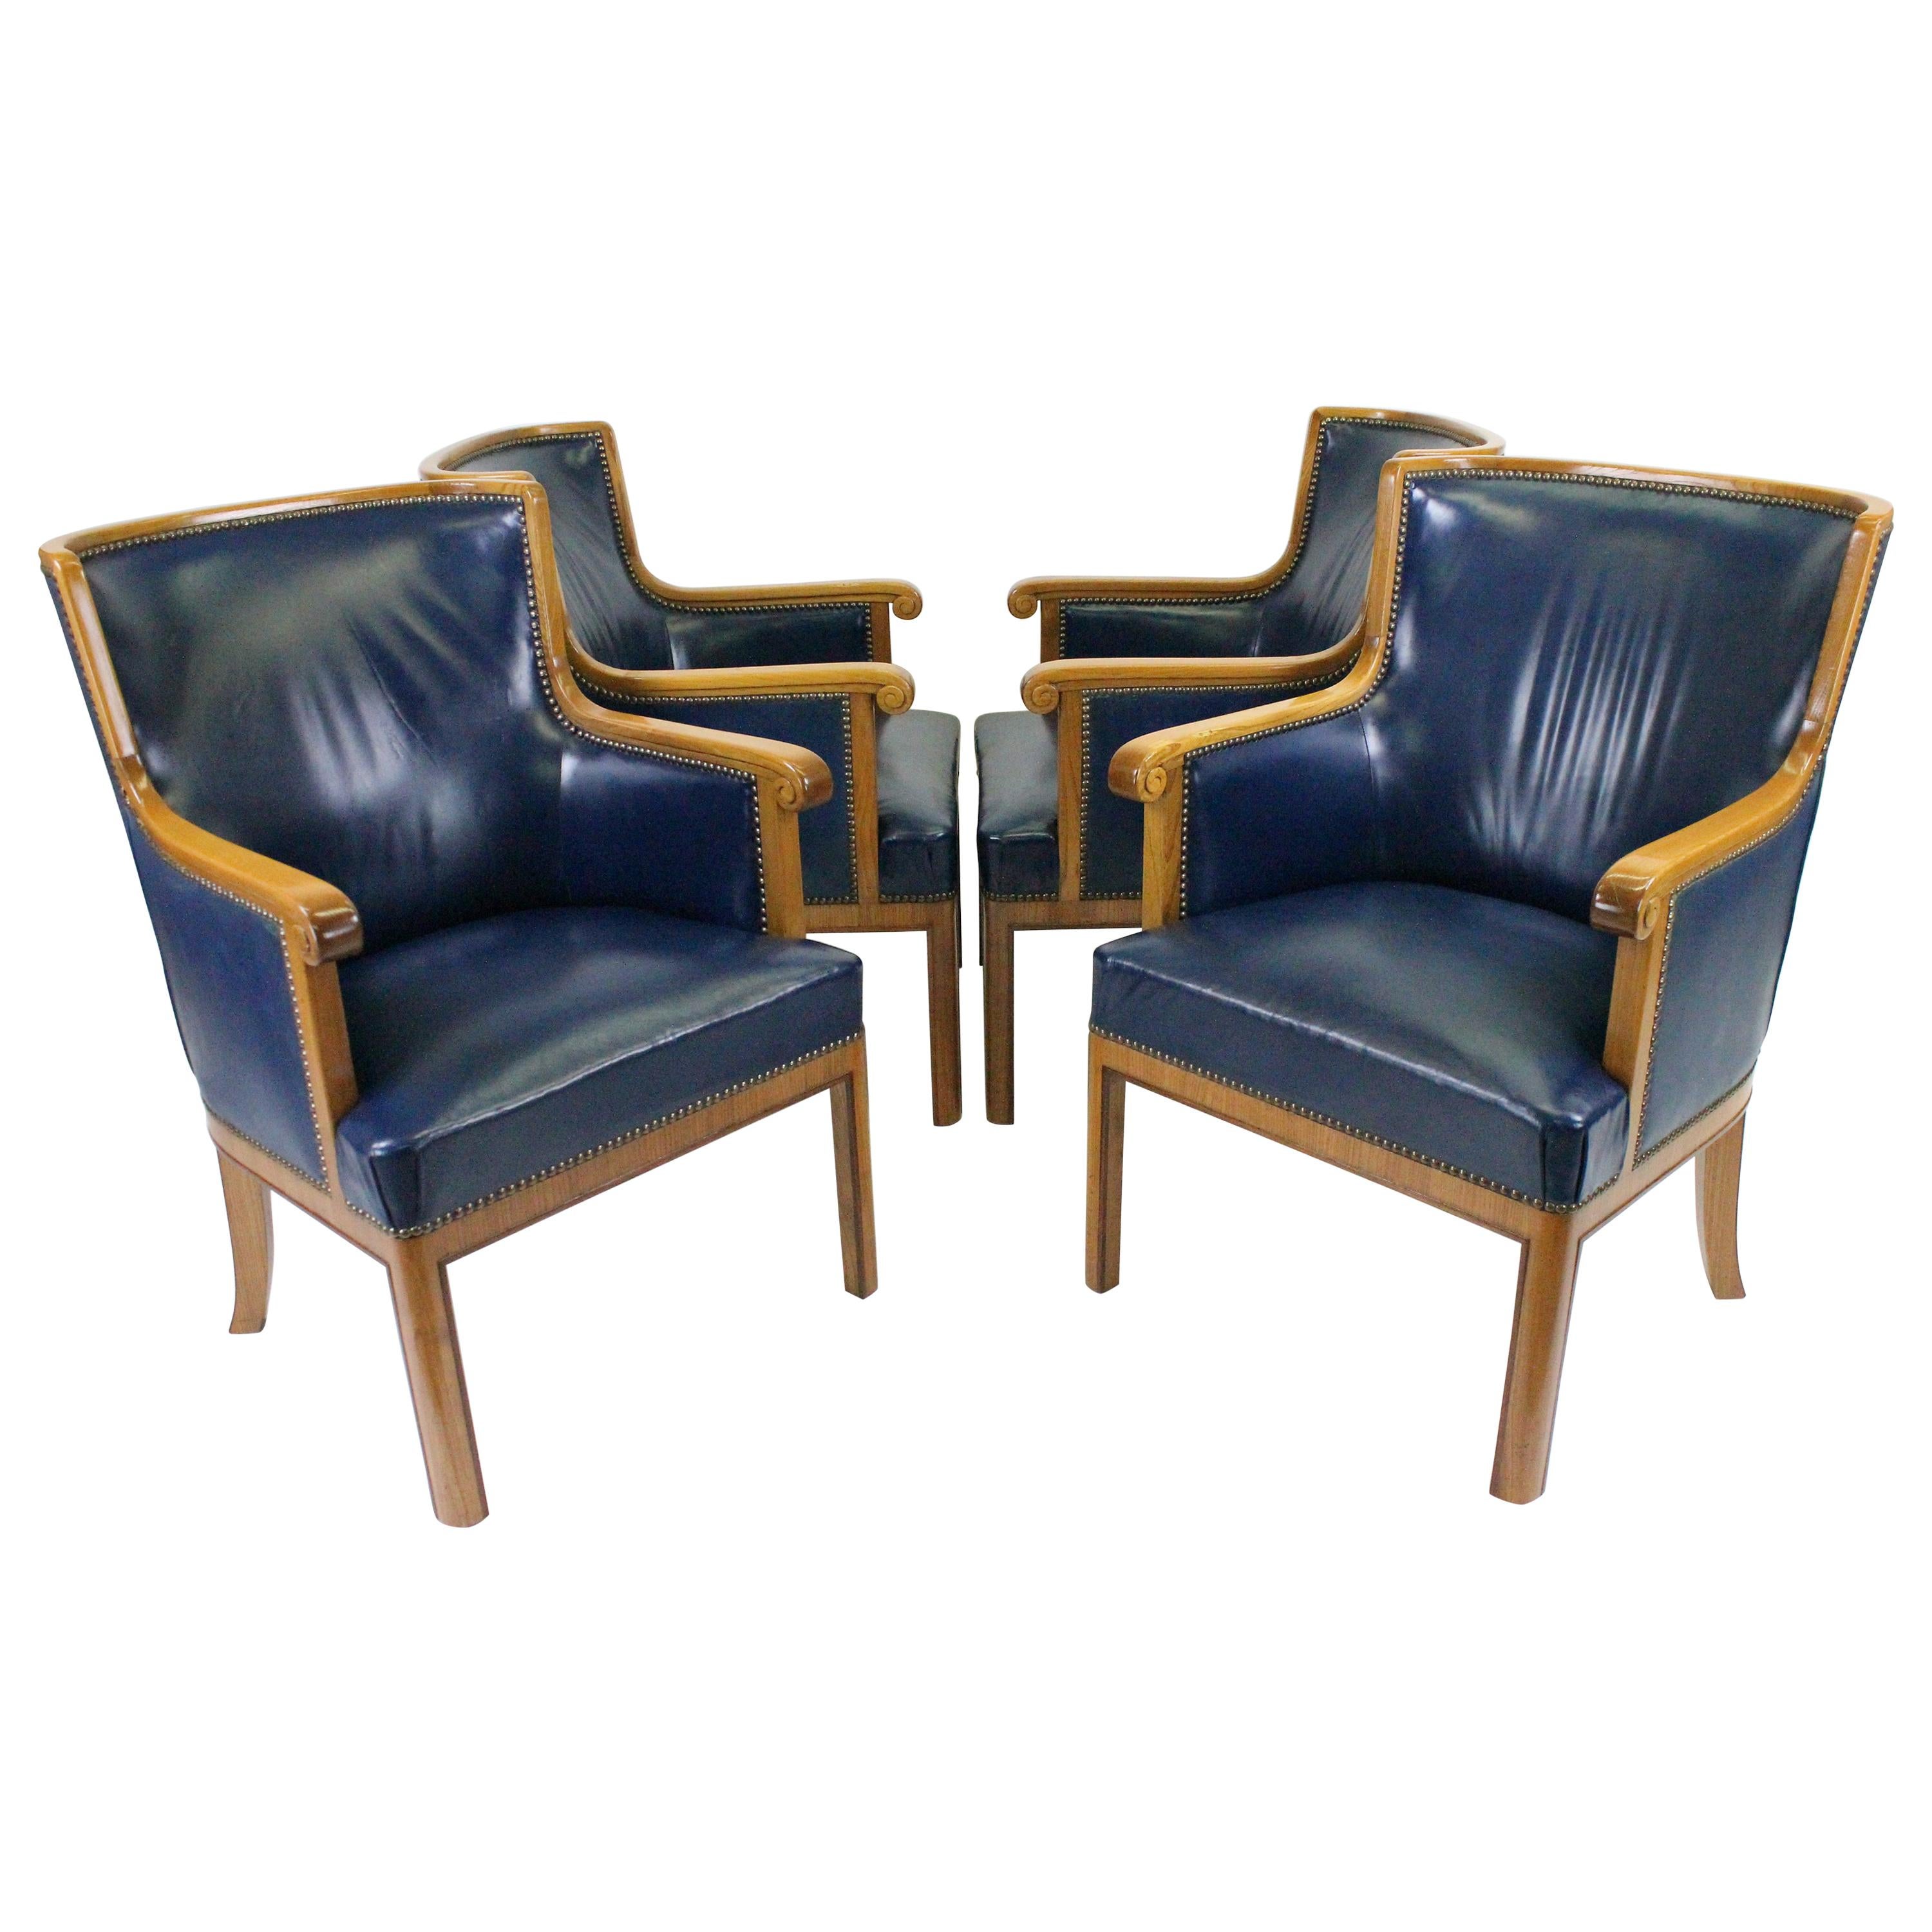 Two Pairs of Swedish 1930s Armchairs by Bodafors in Elm and Royal Blue Leather